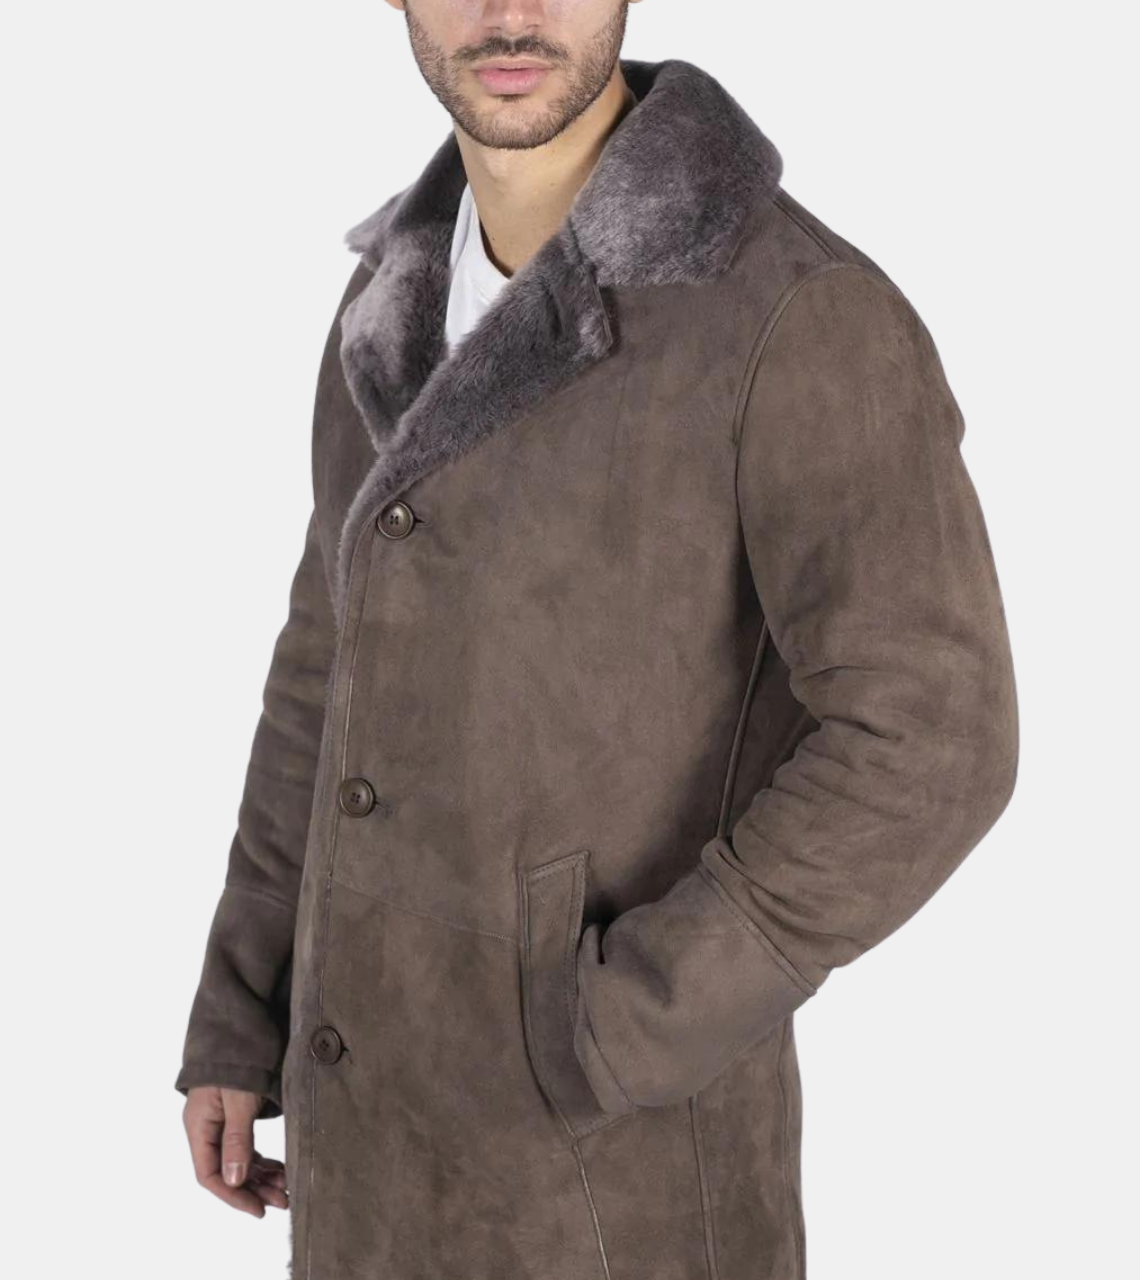  Bronte Tan Beige Shearling Leather Coat For Men's